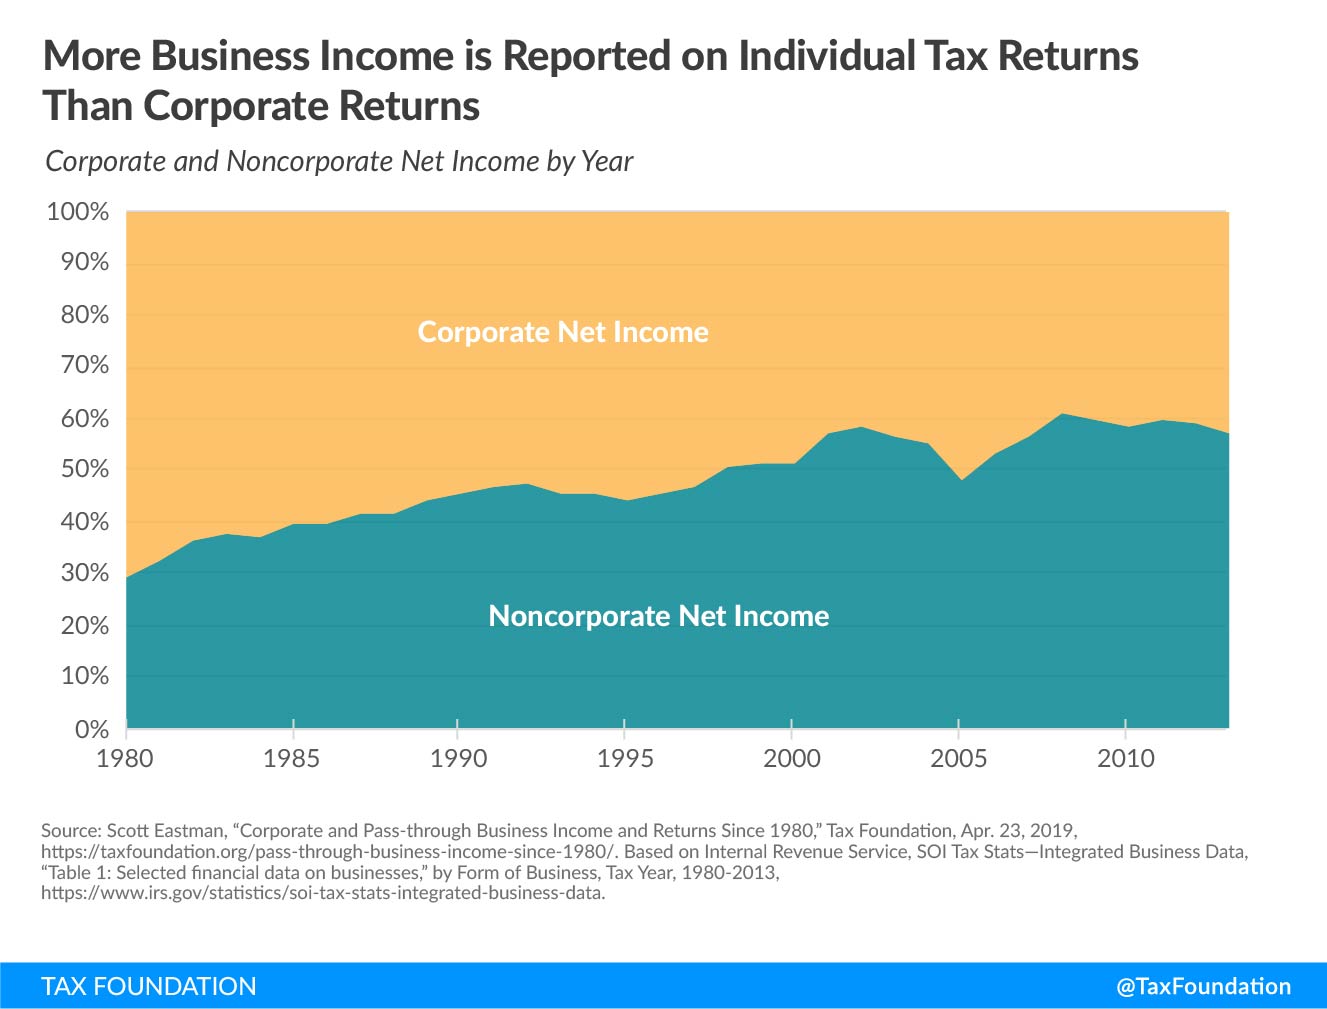 More Business Income Is Reported on Individual Tax Returns Than Corporate Returns